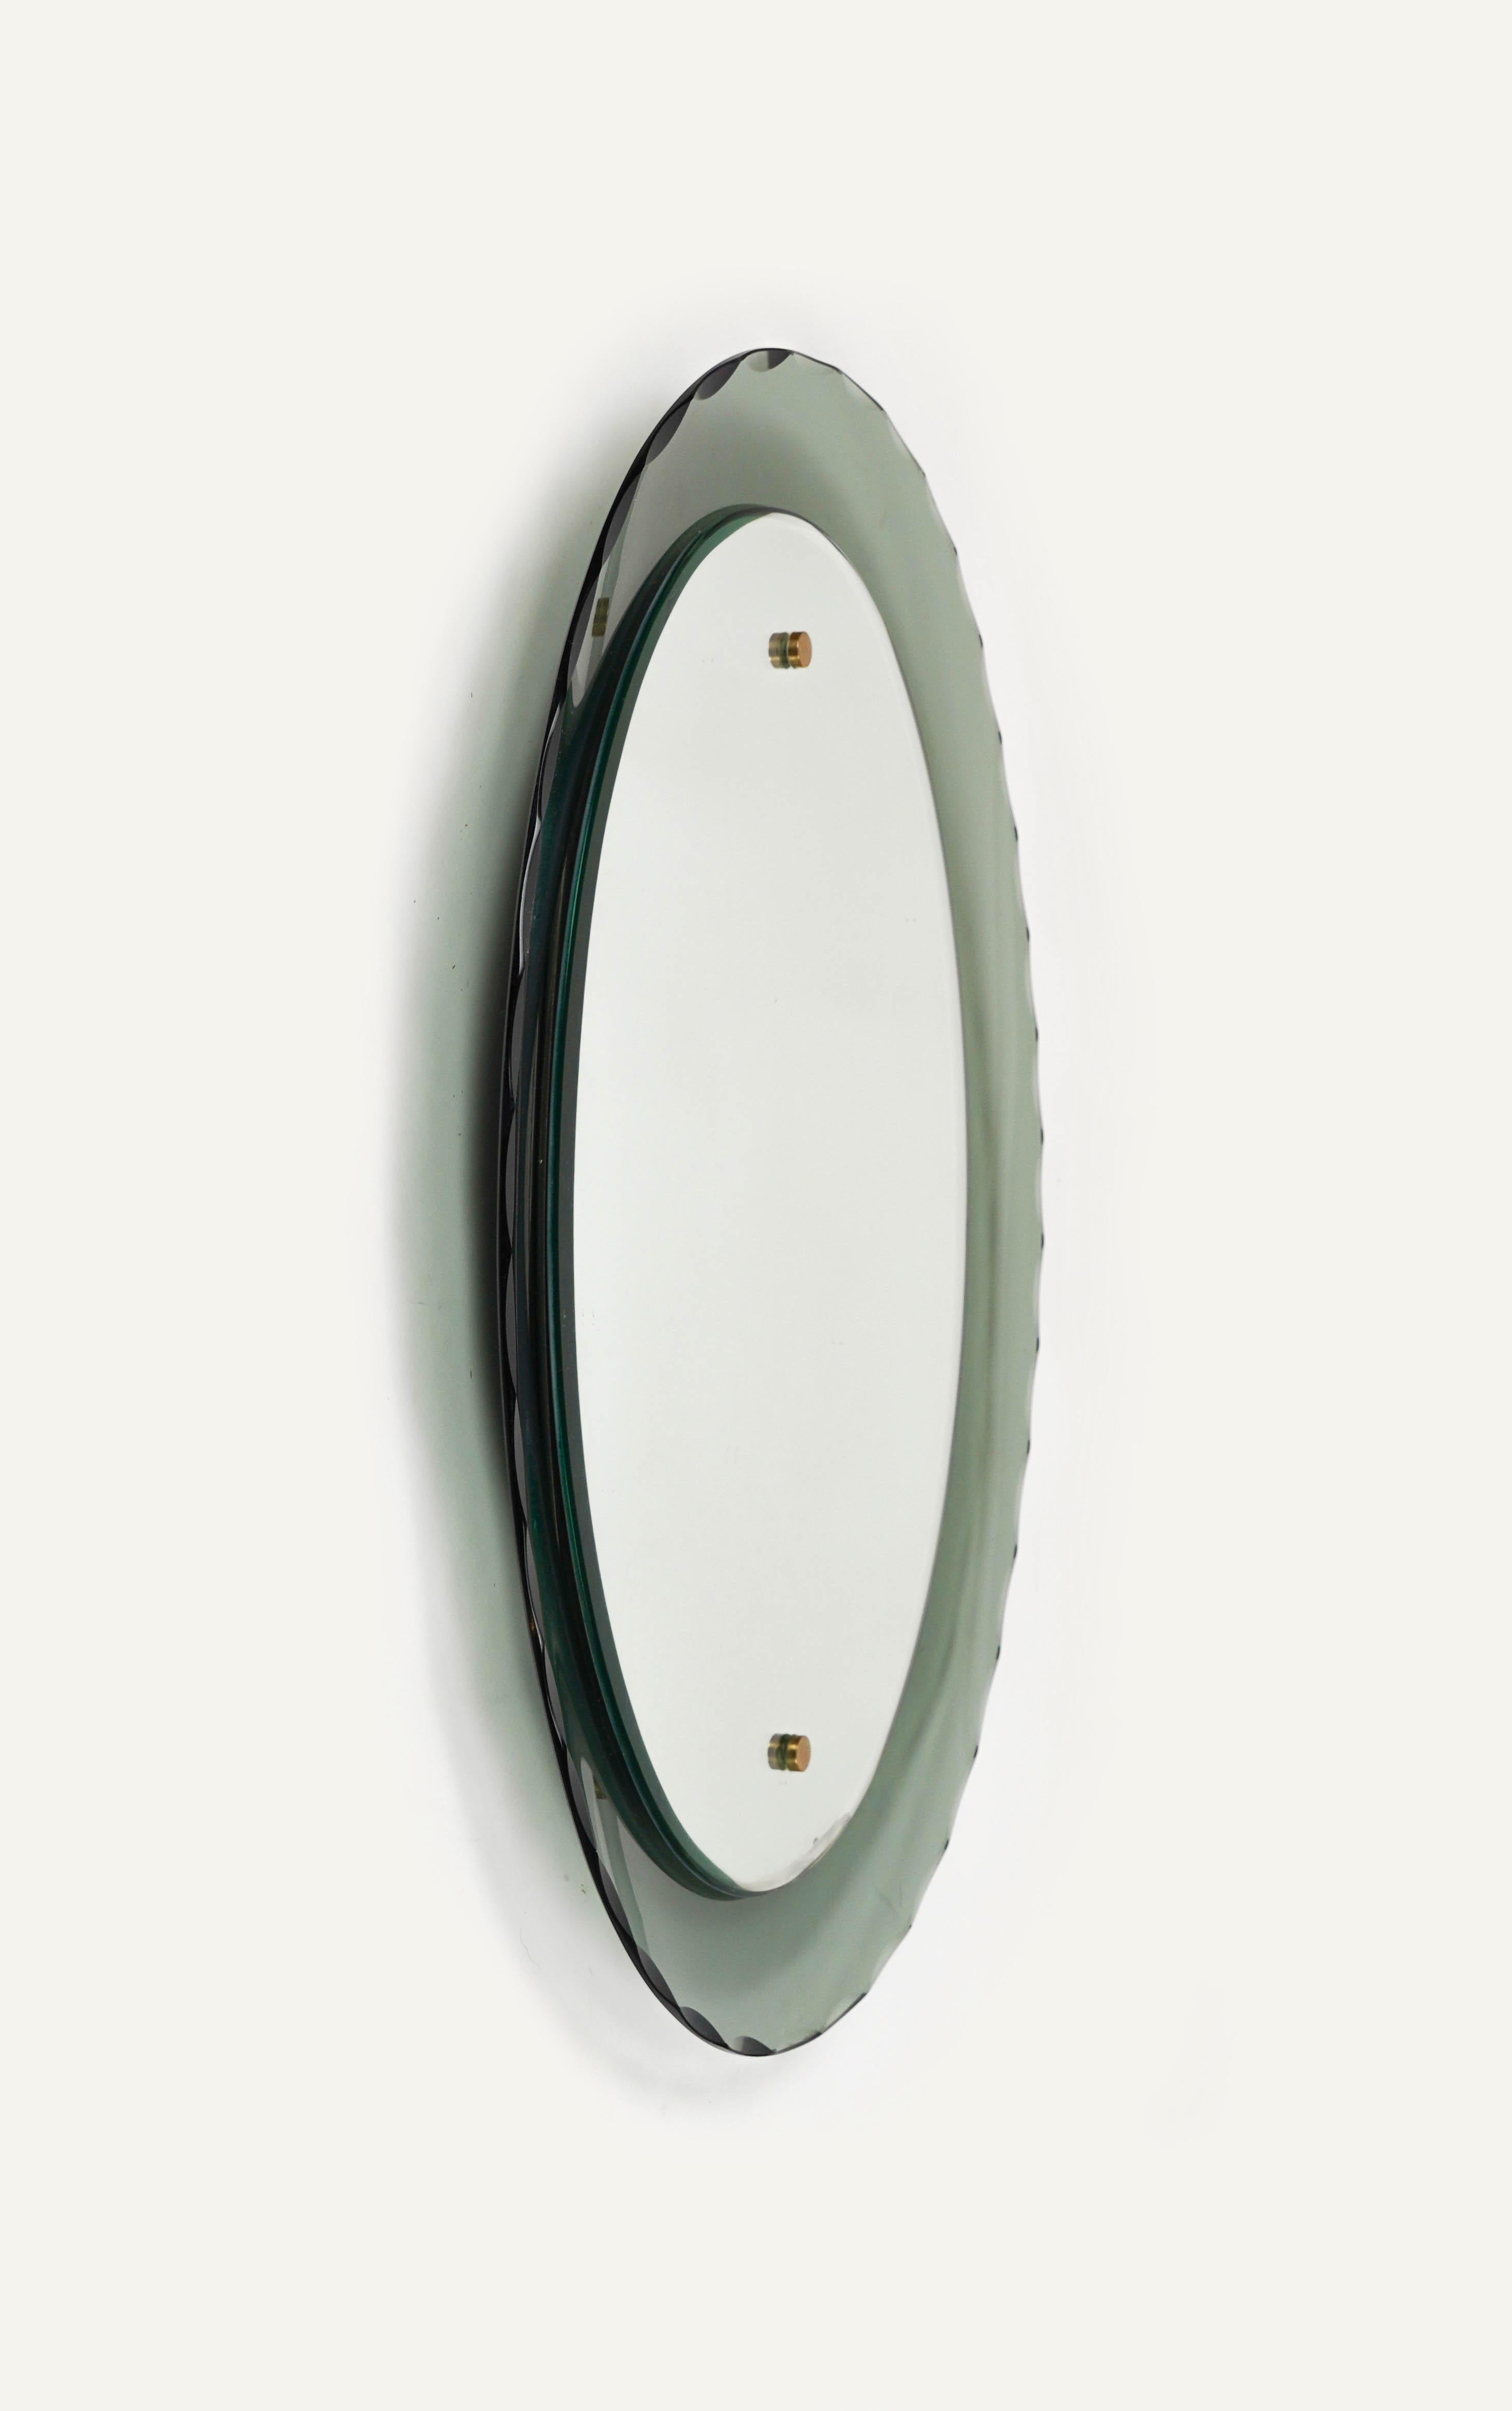 Midcentury Oval Wall Mirror whit Smoked Glass Frame by Cristal Arte, Italy 1960s For Sale 1